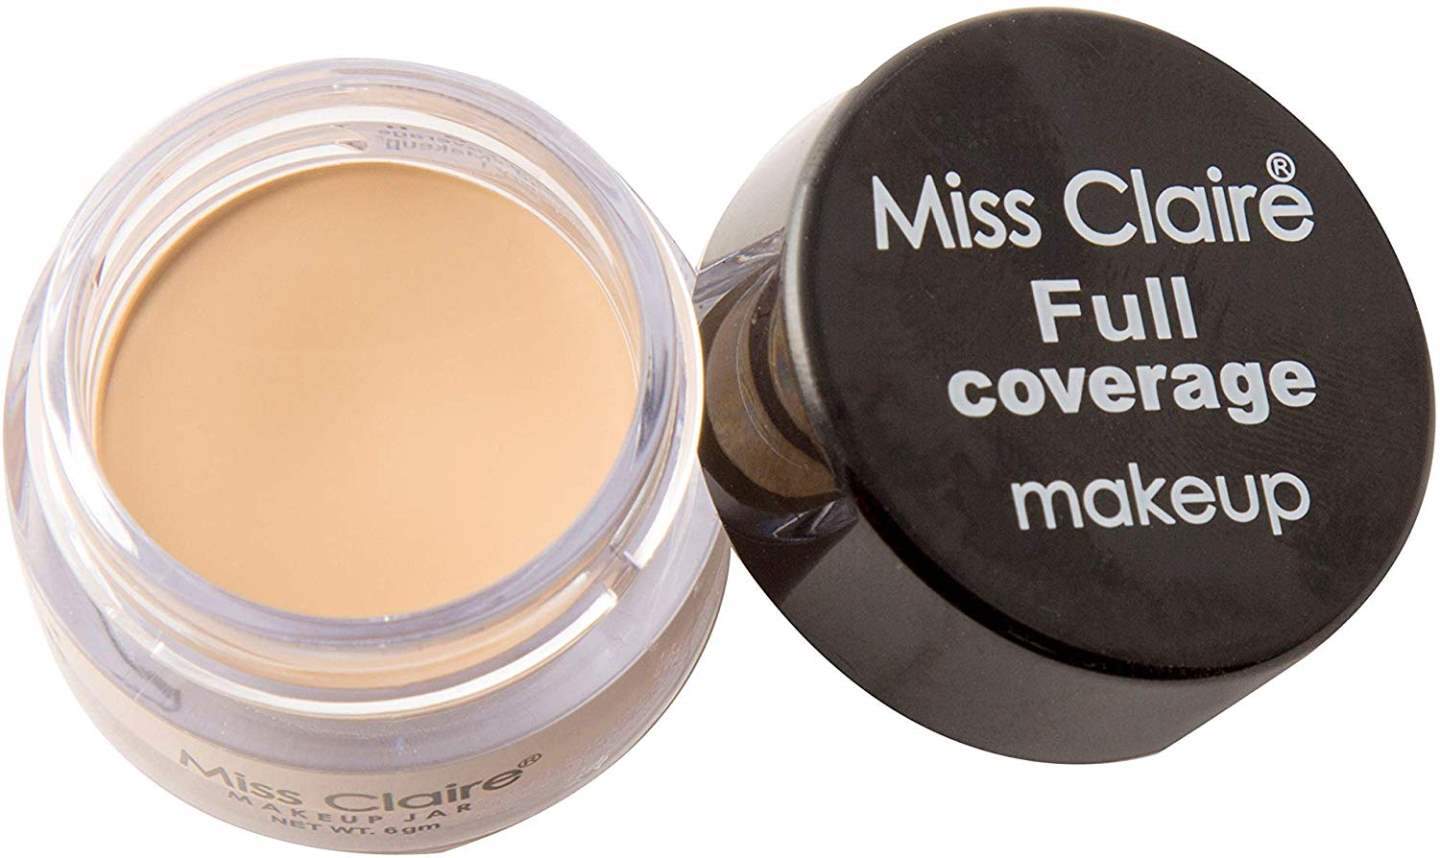 Miss Claire Full Coverage Makeup + Concealer #8, Beige